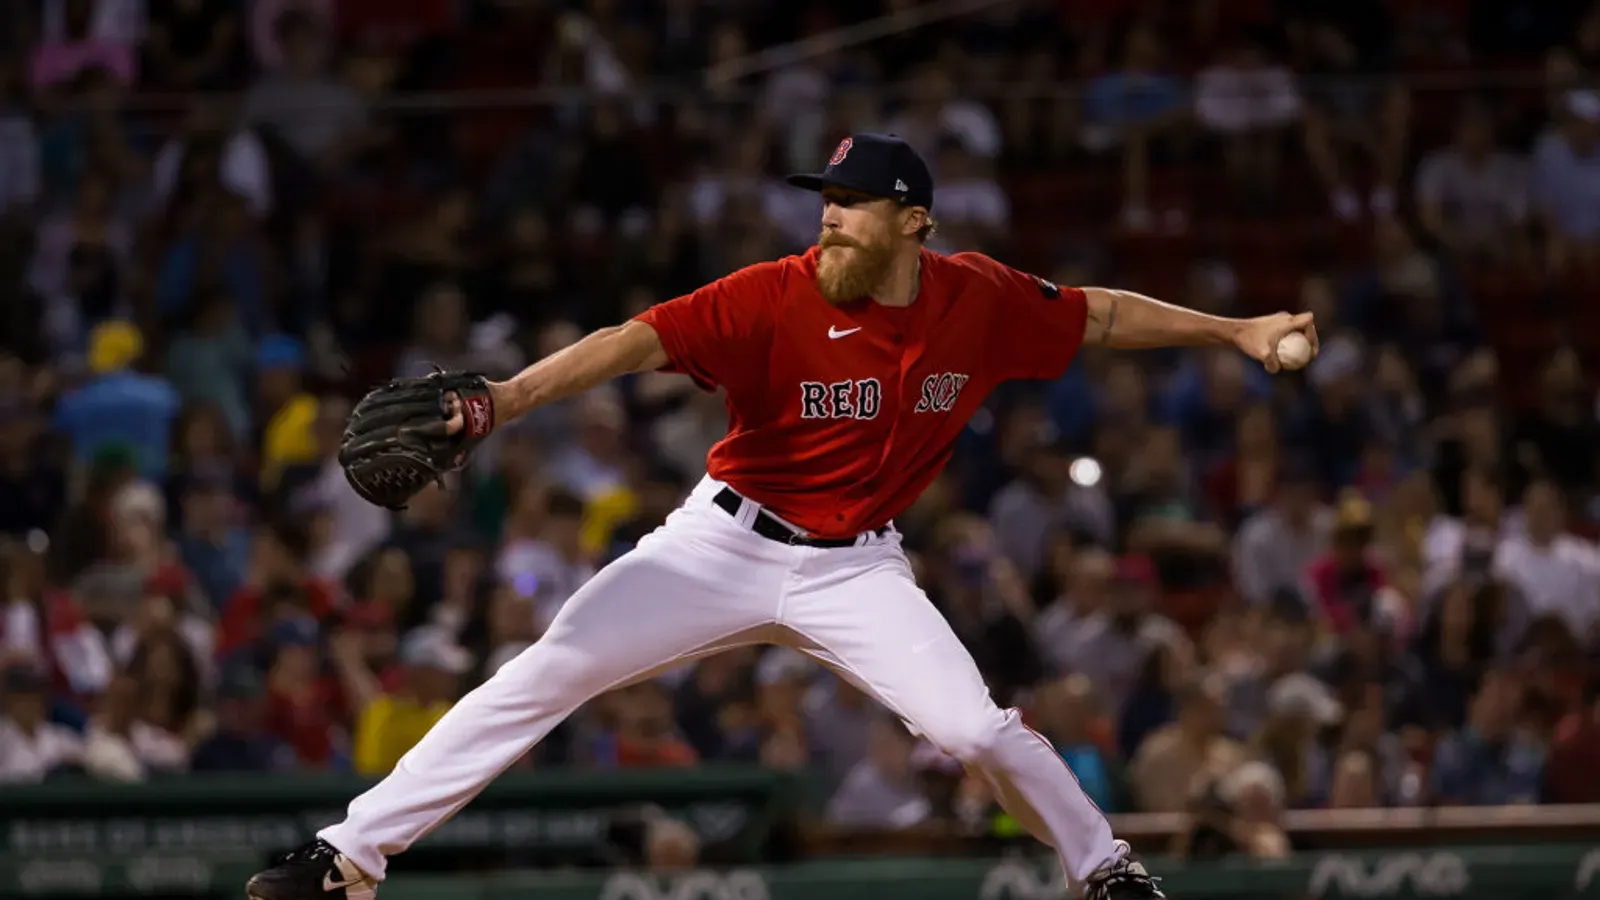 Red Sox end Germán's no-hit bid in 8th, storm past Yanks 5-4